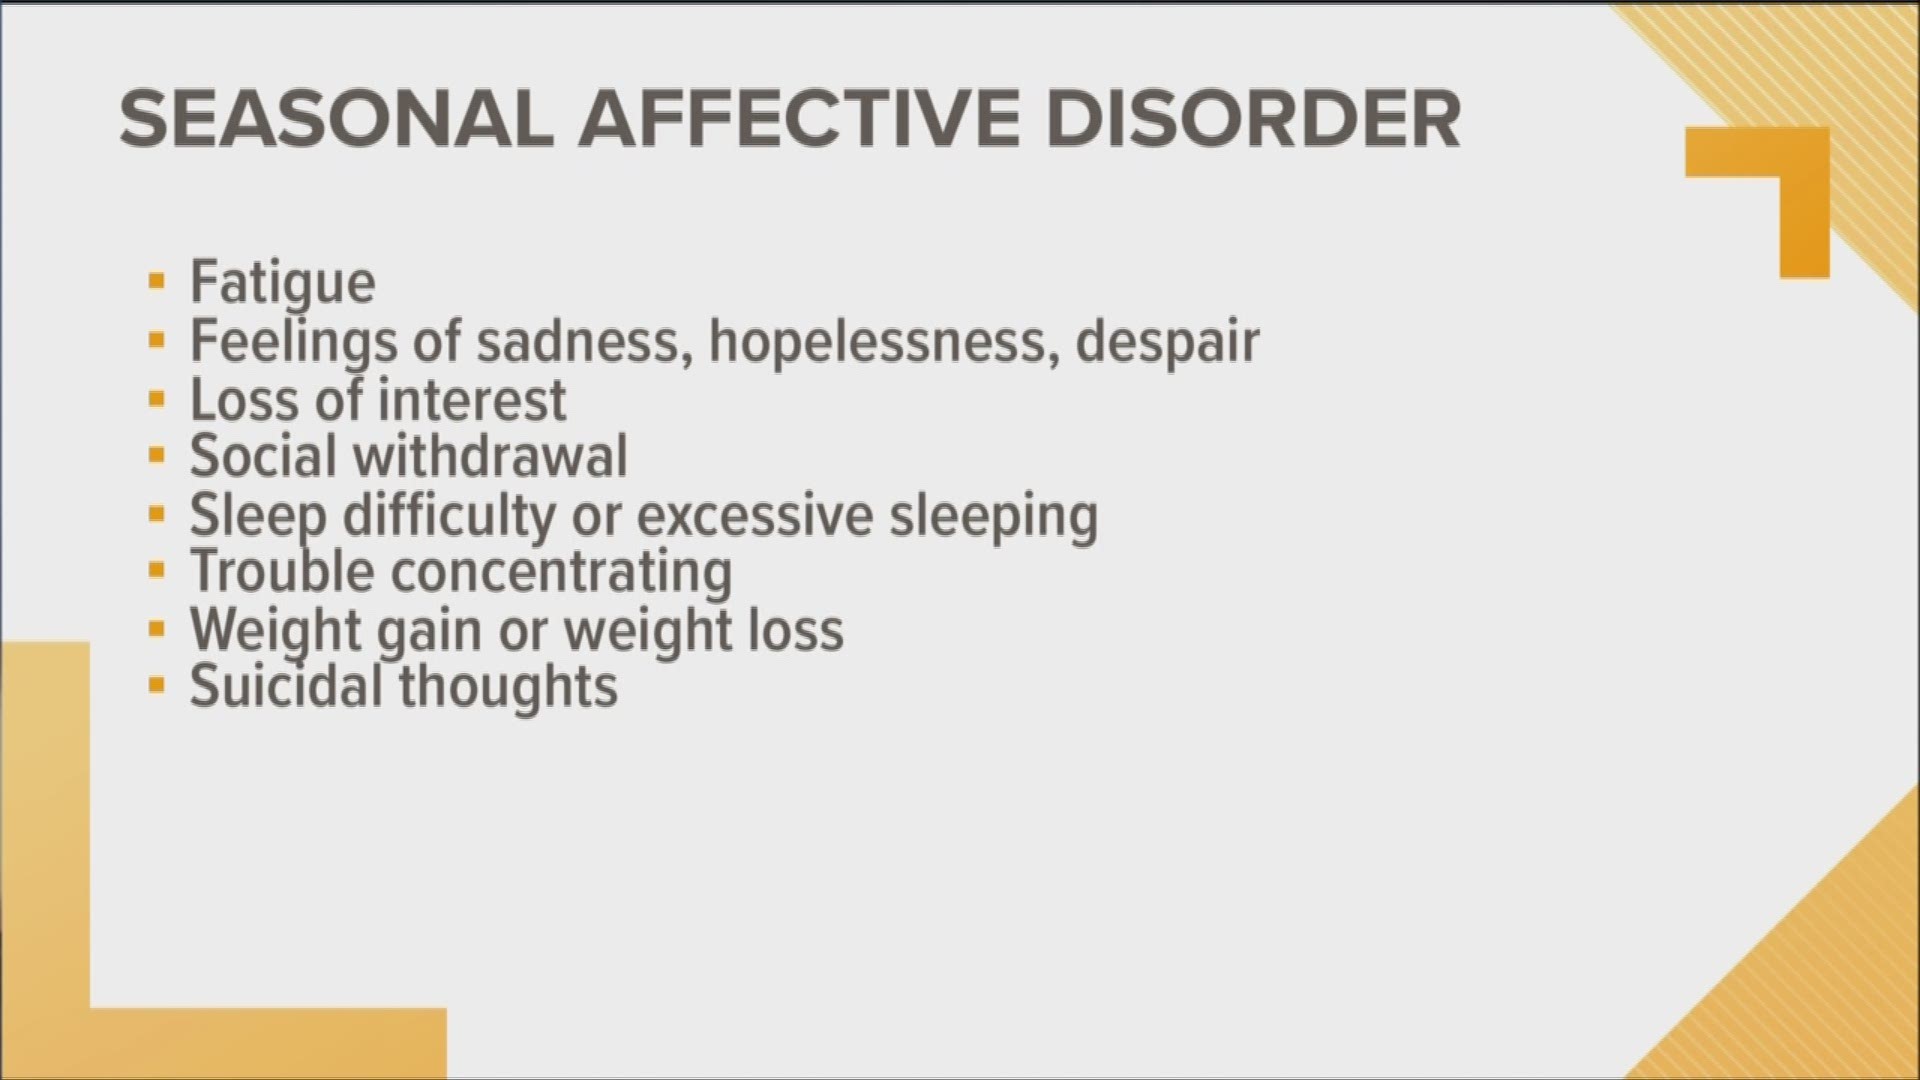 Here are some symptoms of SAD, or Seasonal Affective Disorder.